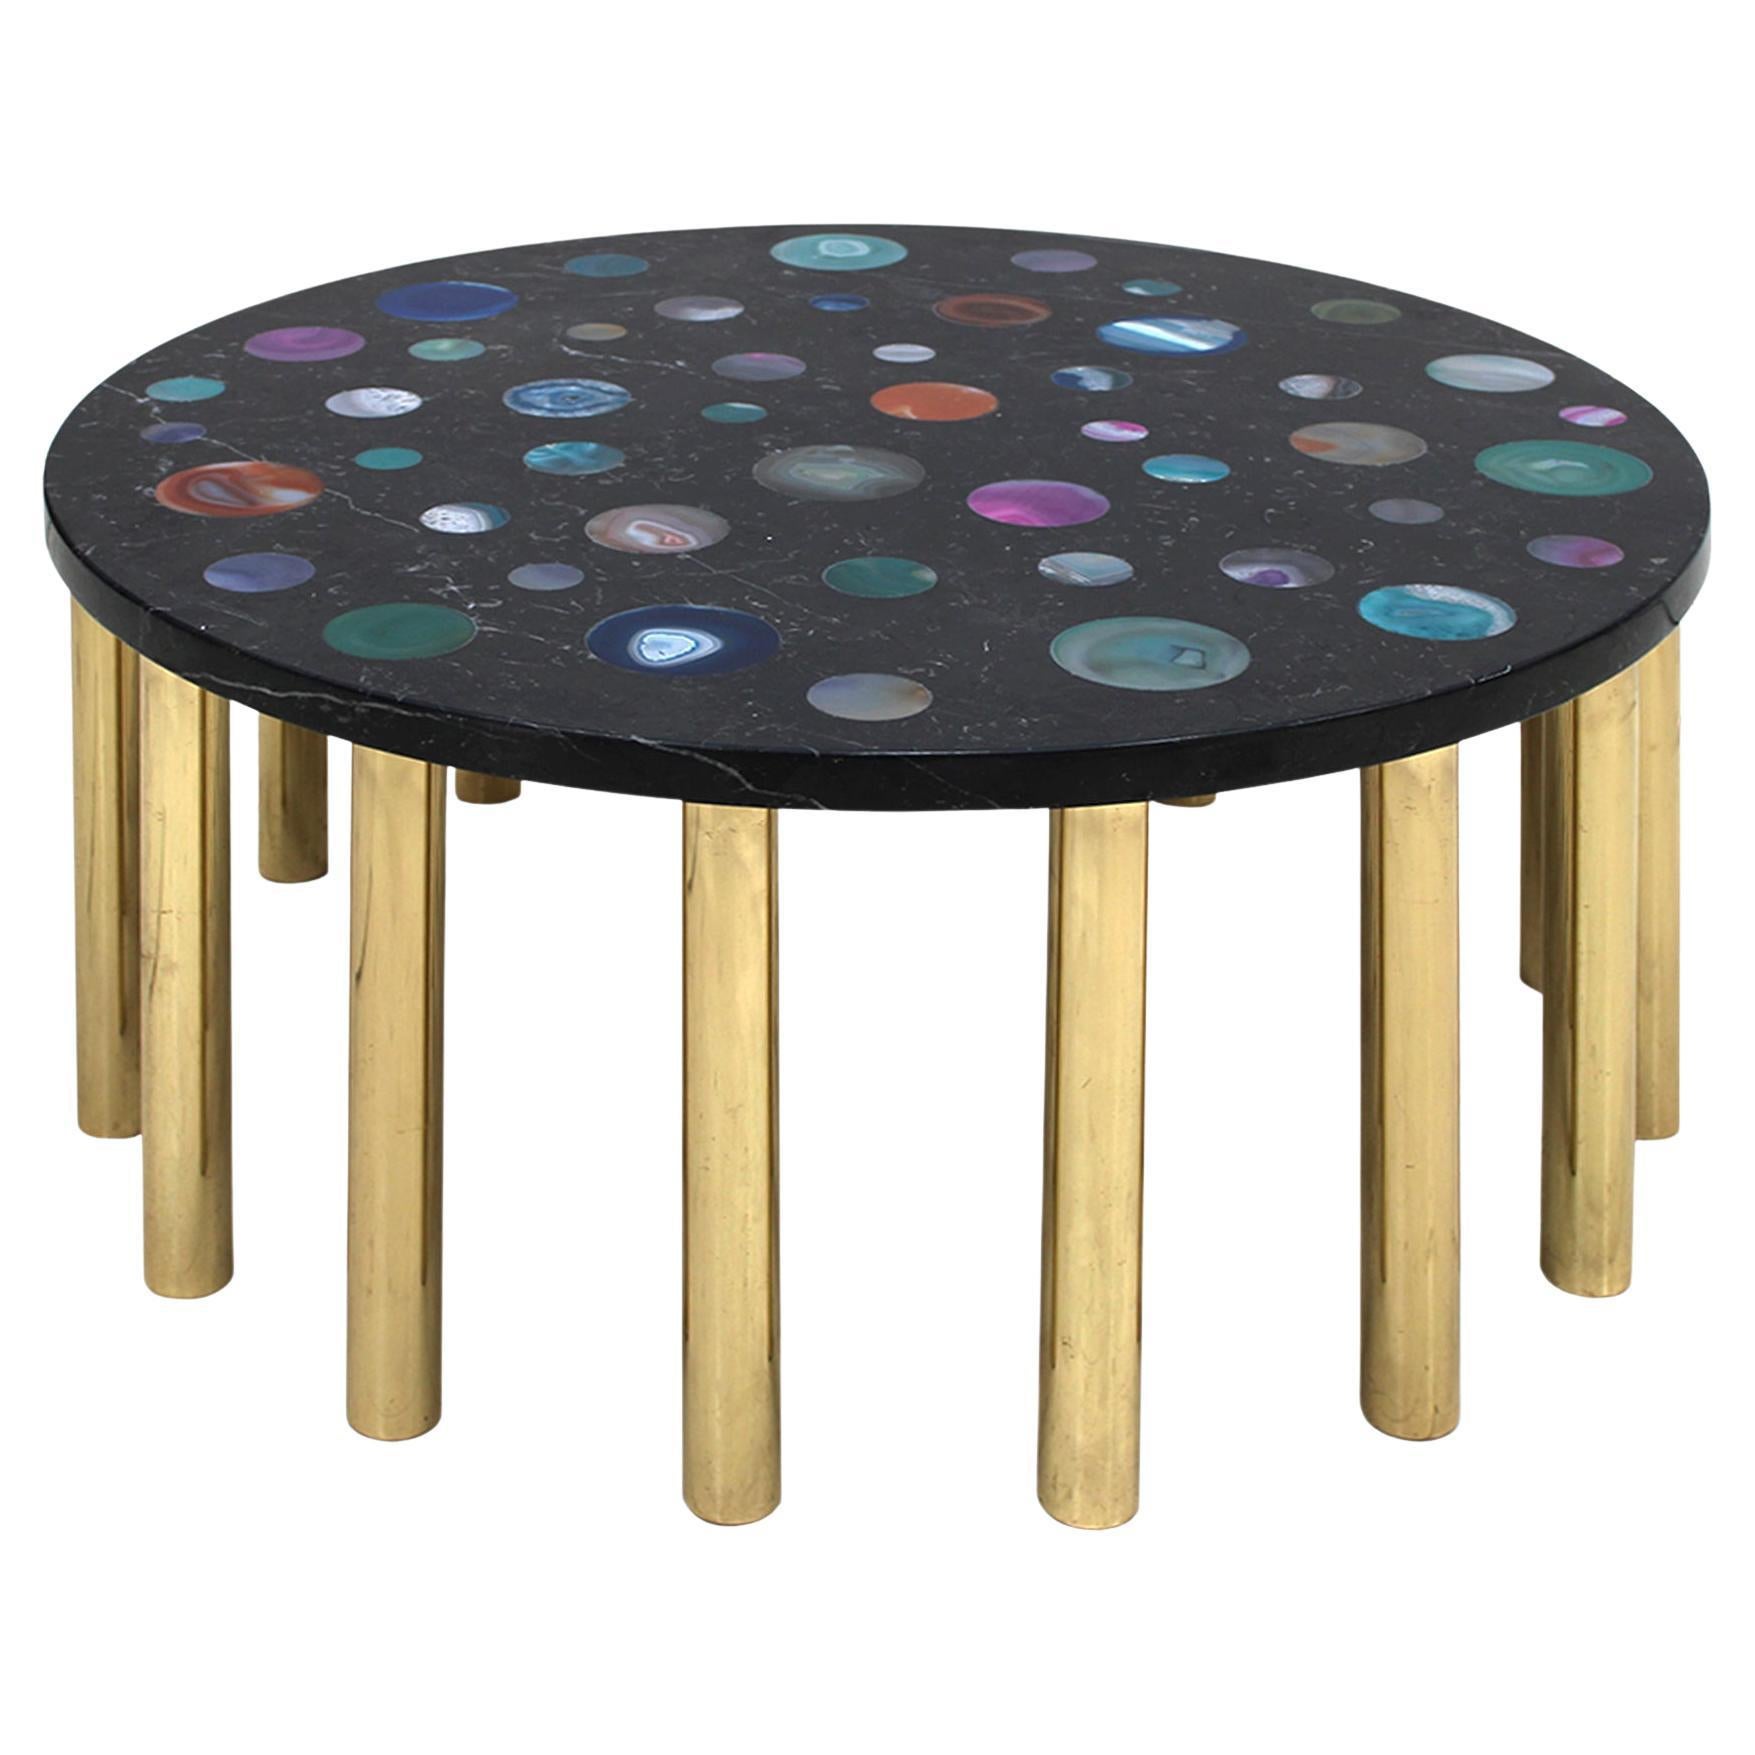 Contemporary Modern Italian Coffee Table Mod, "Cosmos" Designed by Superego im Angebot